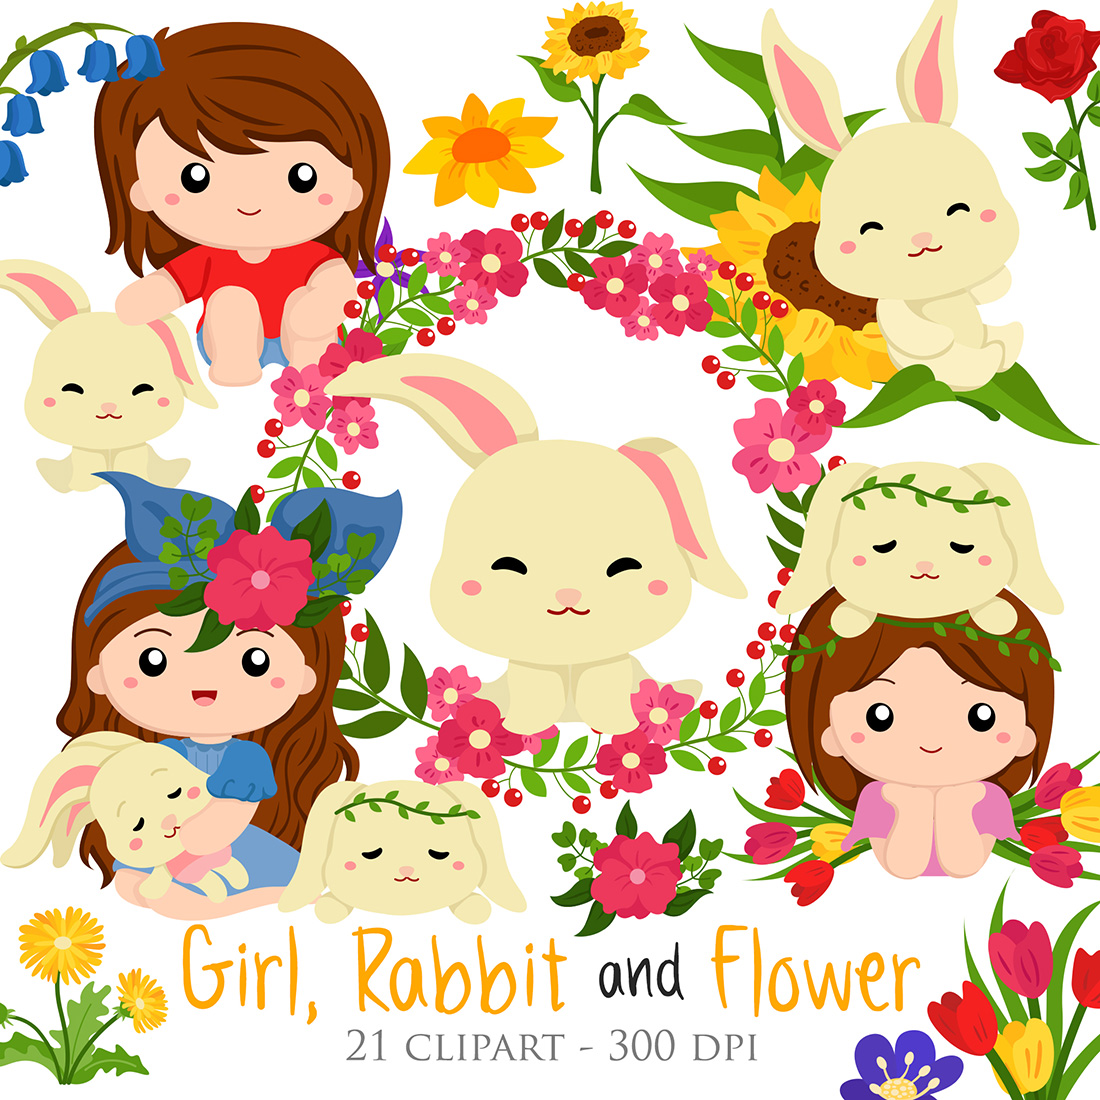 Girl Rabbit Flower Kids Colorful Cute Vector Clipart Illustrations cover image.